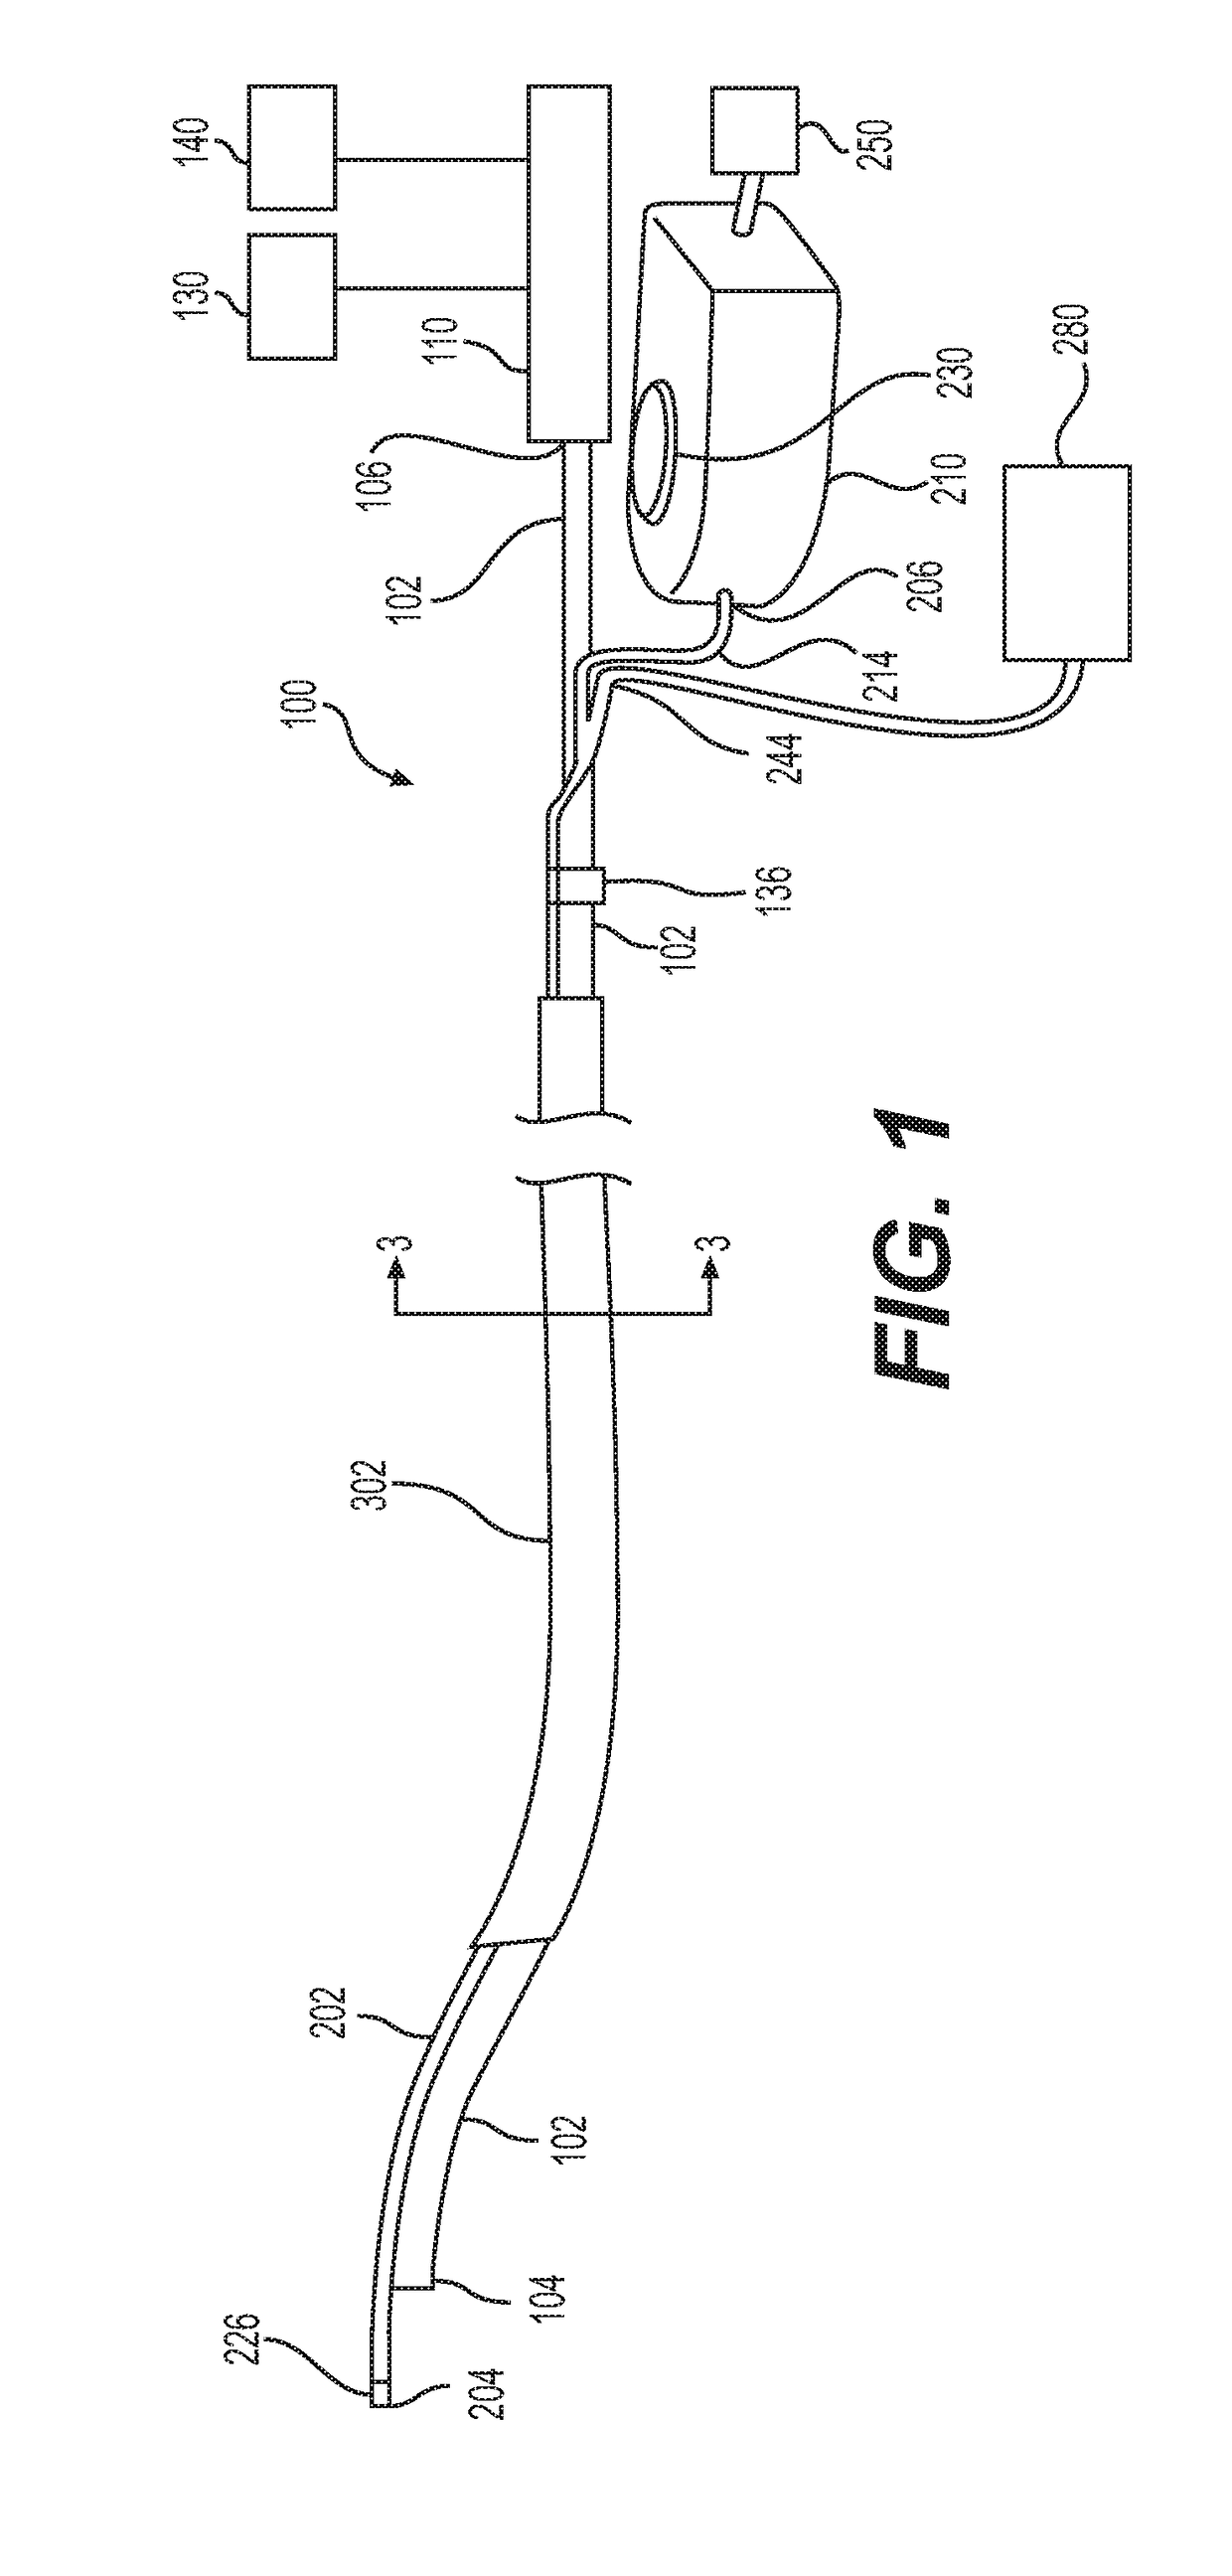 Medical device and methods of use